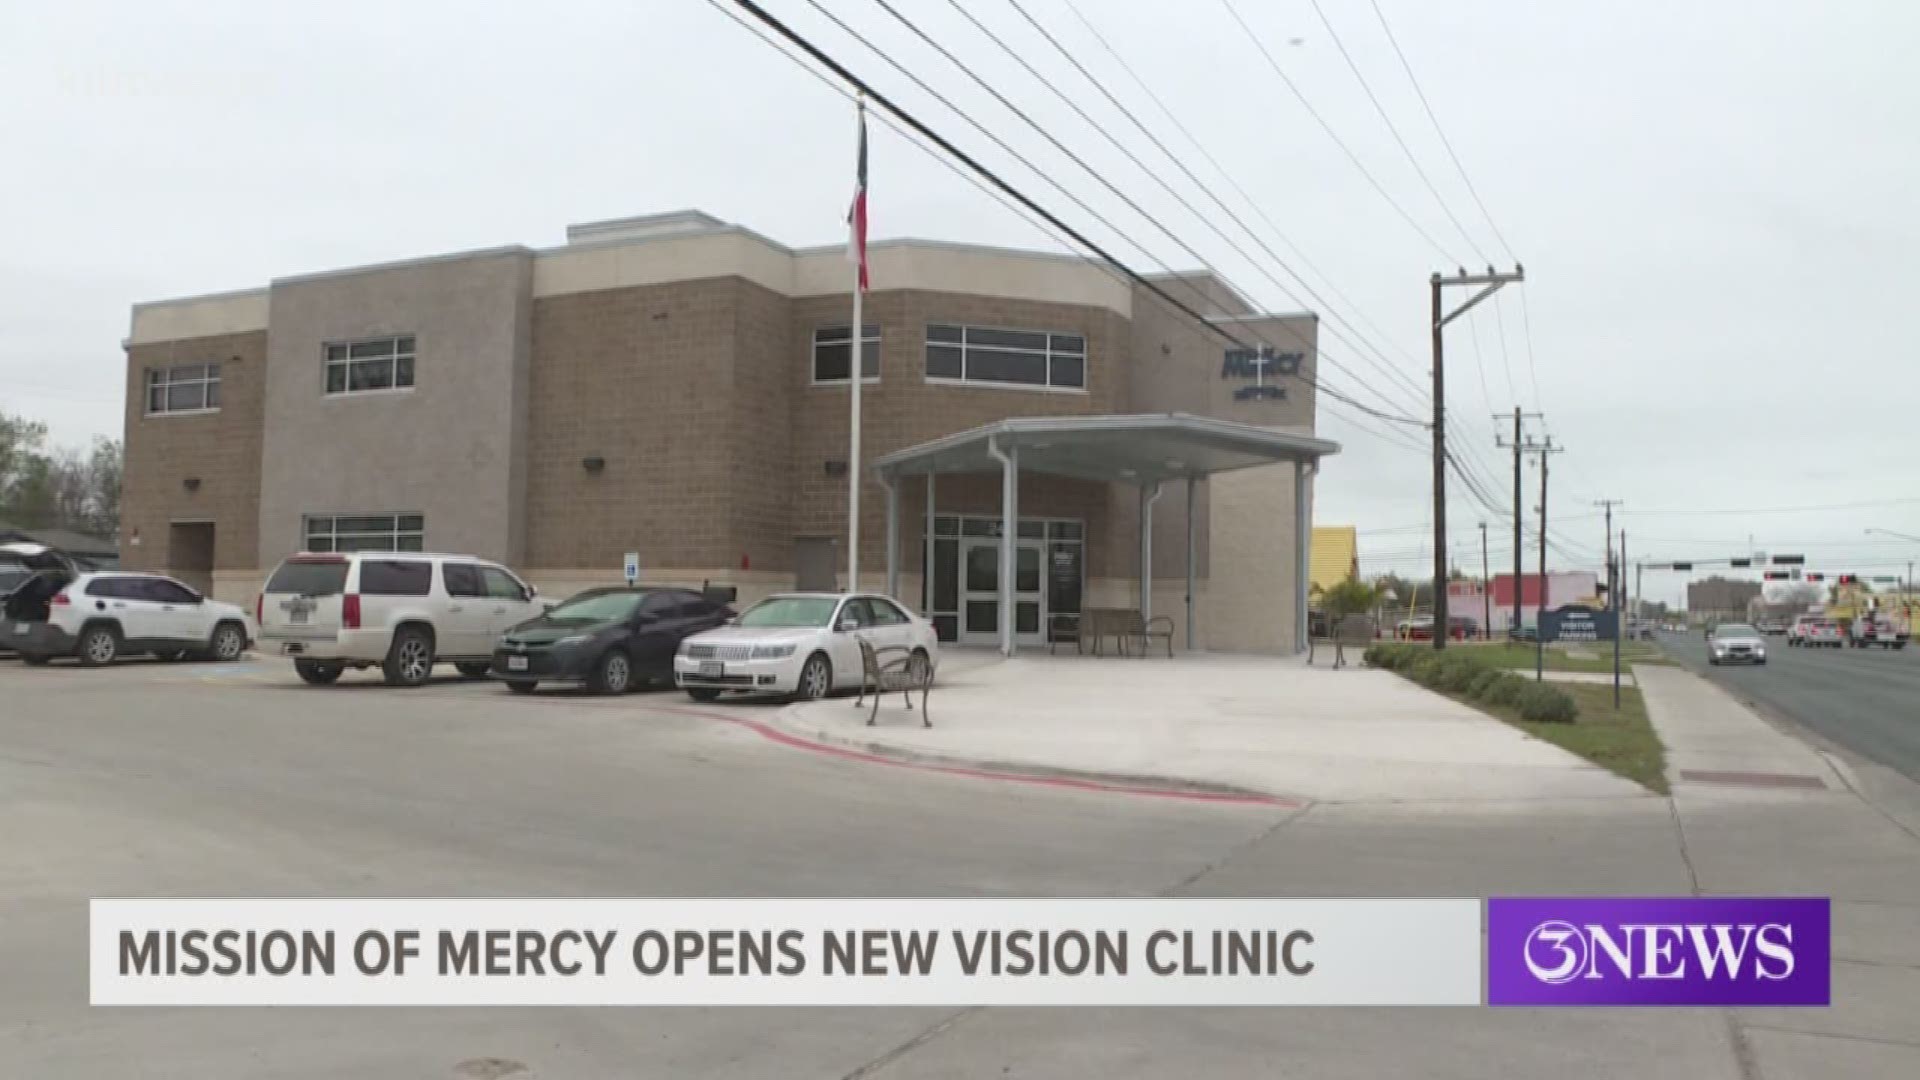 Mission of Mercy has offered free and low-cost medical services to the uninsured in the Coastal Bend for the last 12 years.